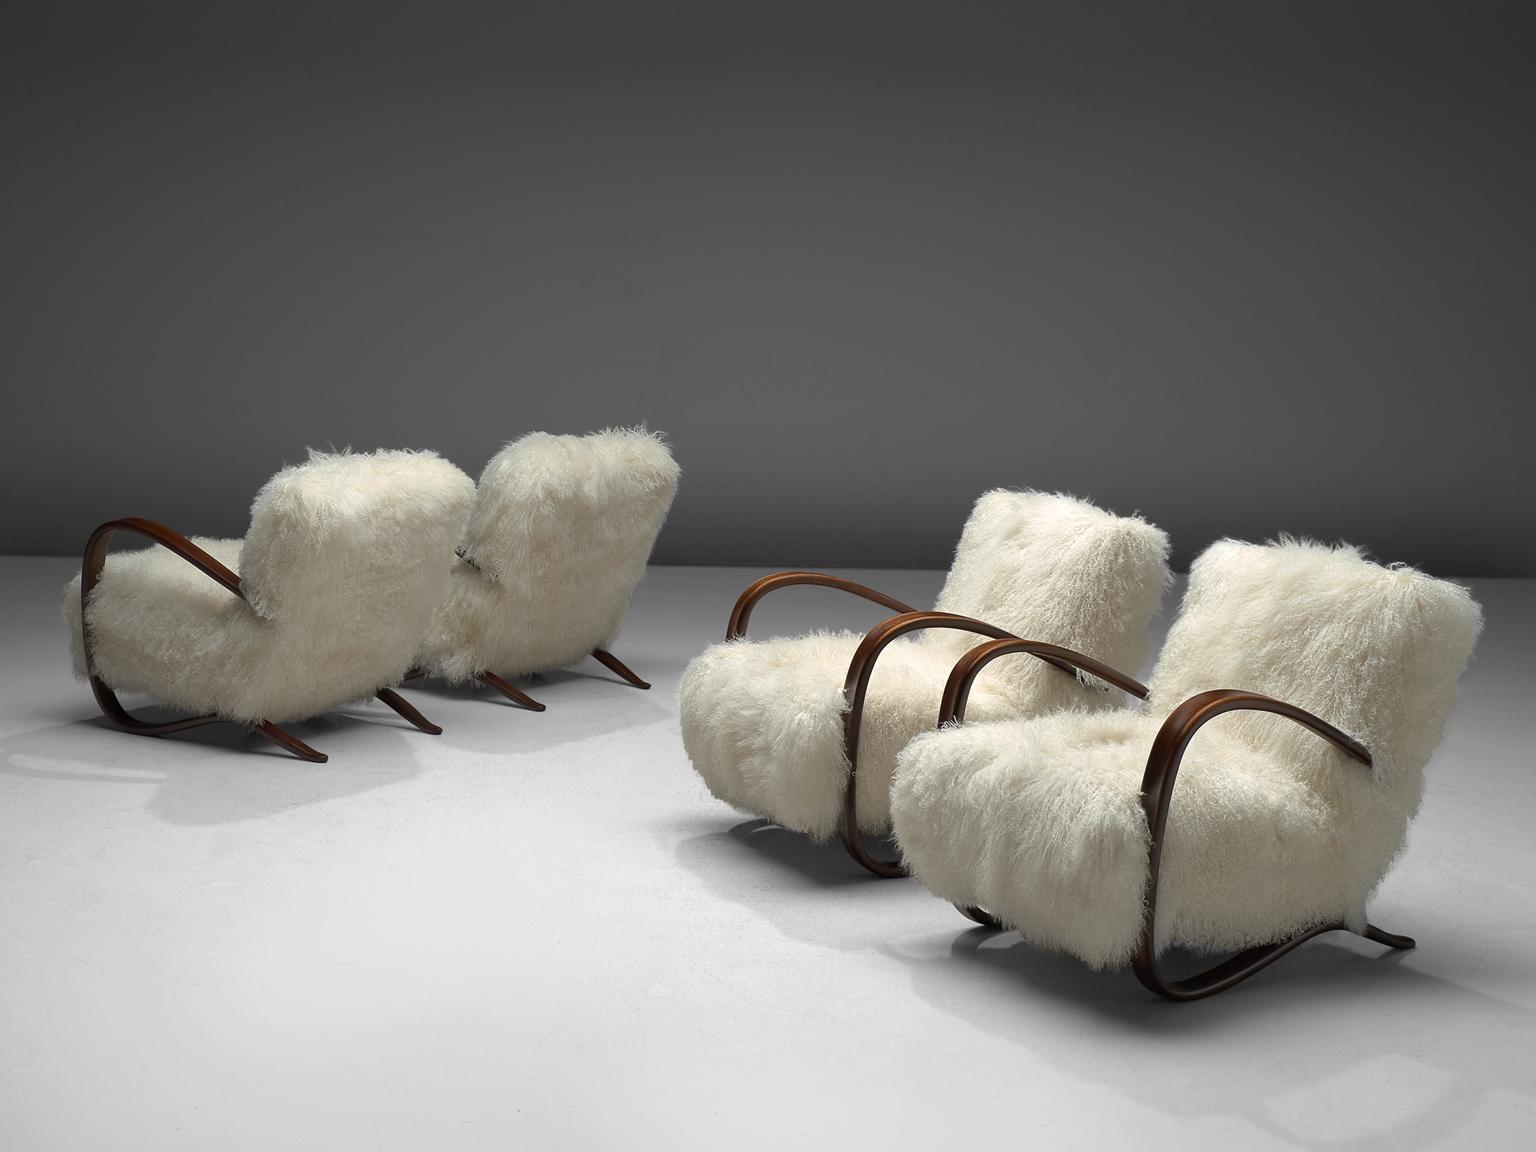 Jindrich Halabala (1903-1978), lounge chairs, in stained beech and sheepskin, Czech Republic, 1930s. 

Extra ordinary white easy chairs with Tibetan lambswool upholstery. These chairs have a very dynamic and abundant appearance. This fuzzy